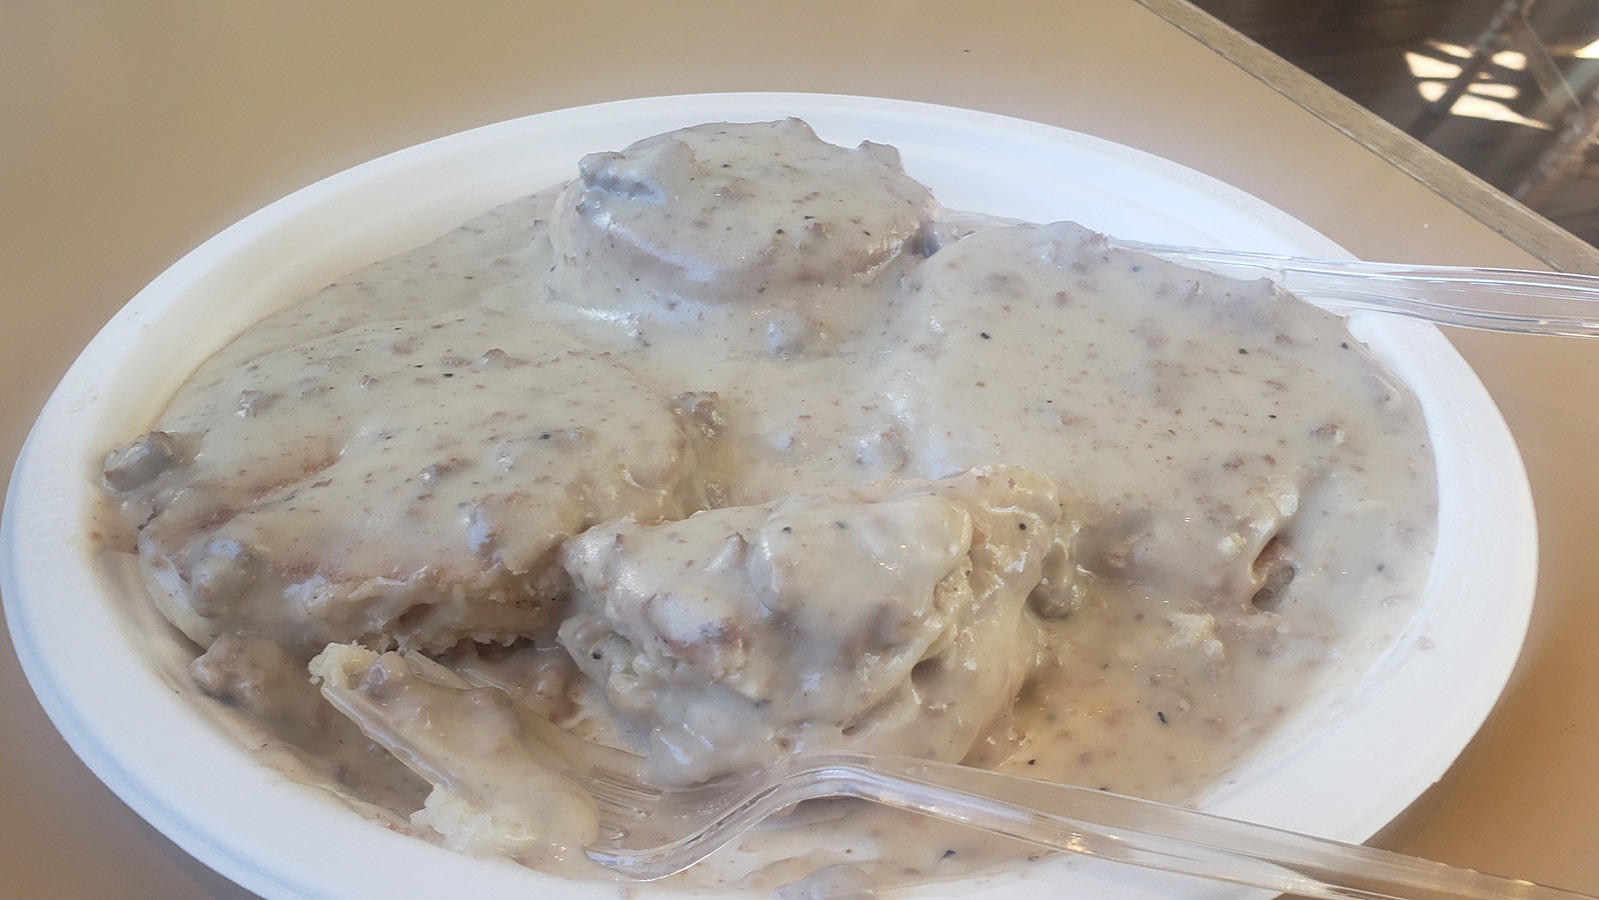 The travel center offers a hearty breakfast fluffy biscuits with sausage gravy.